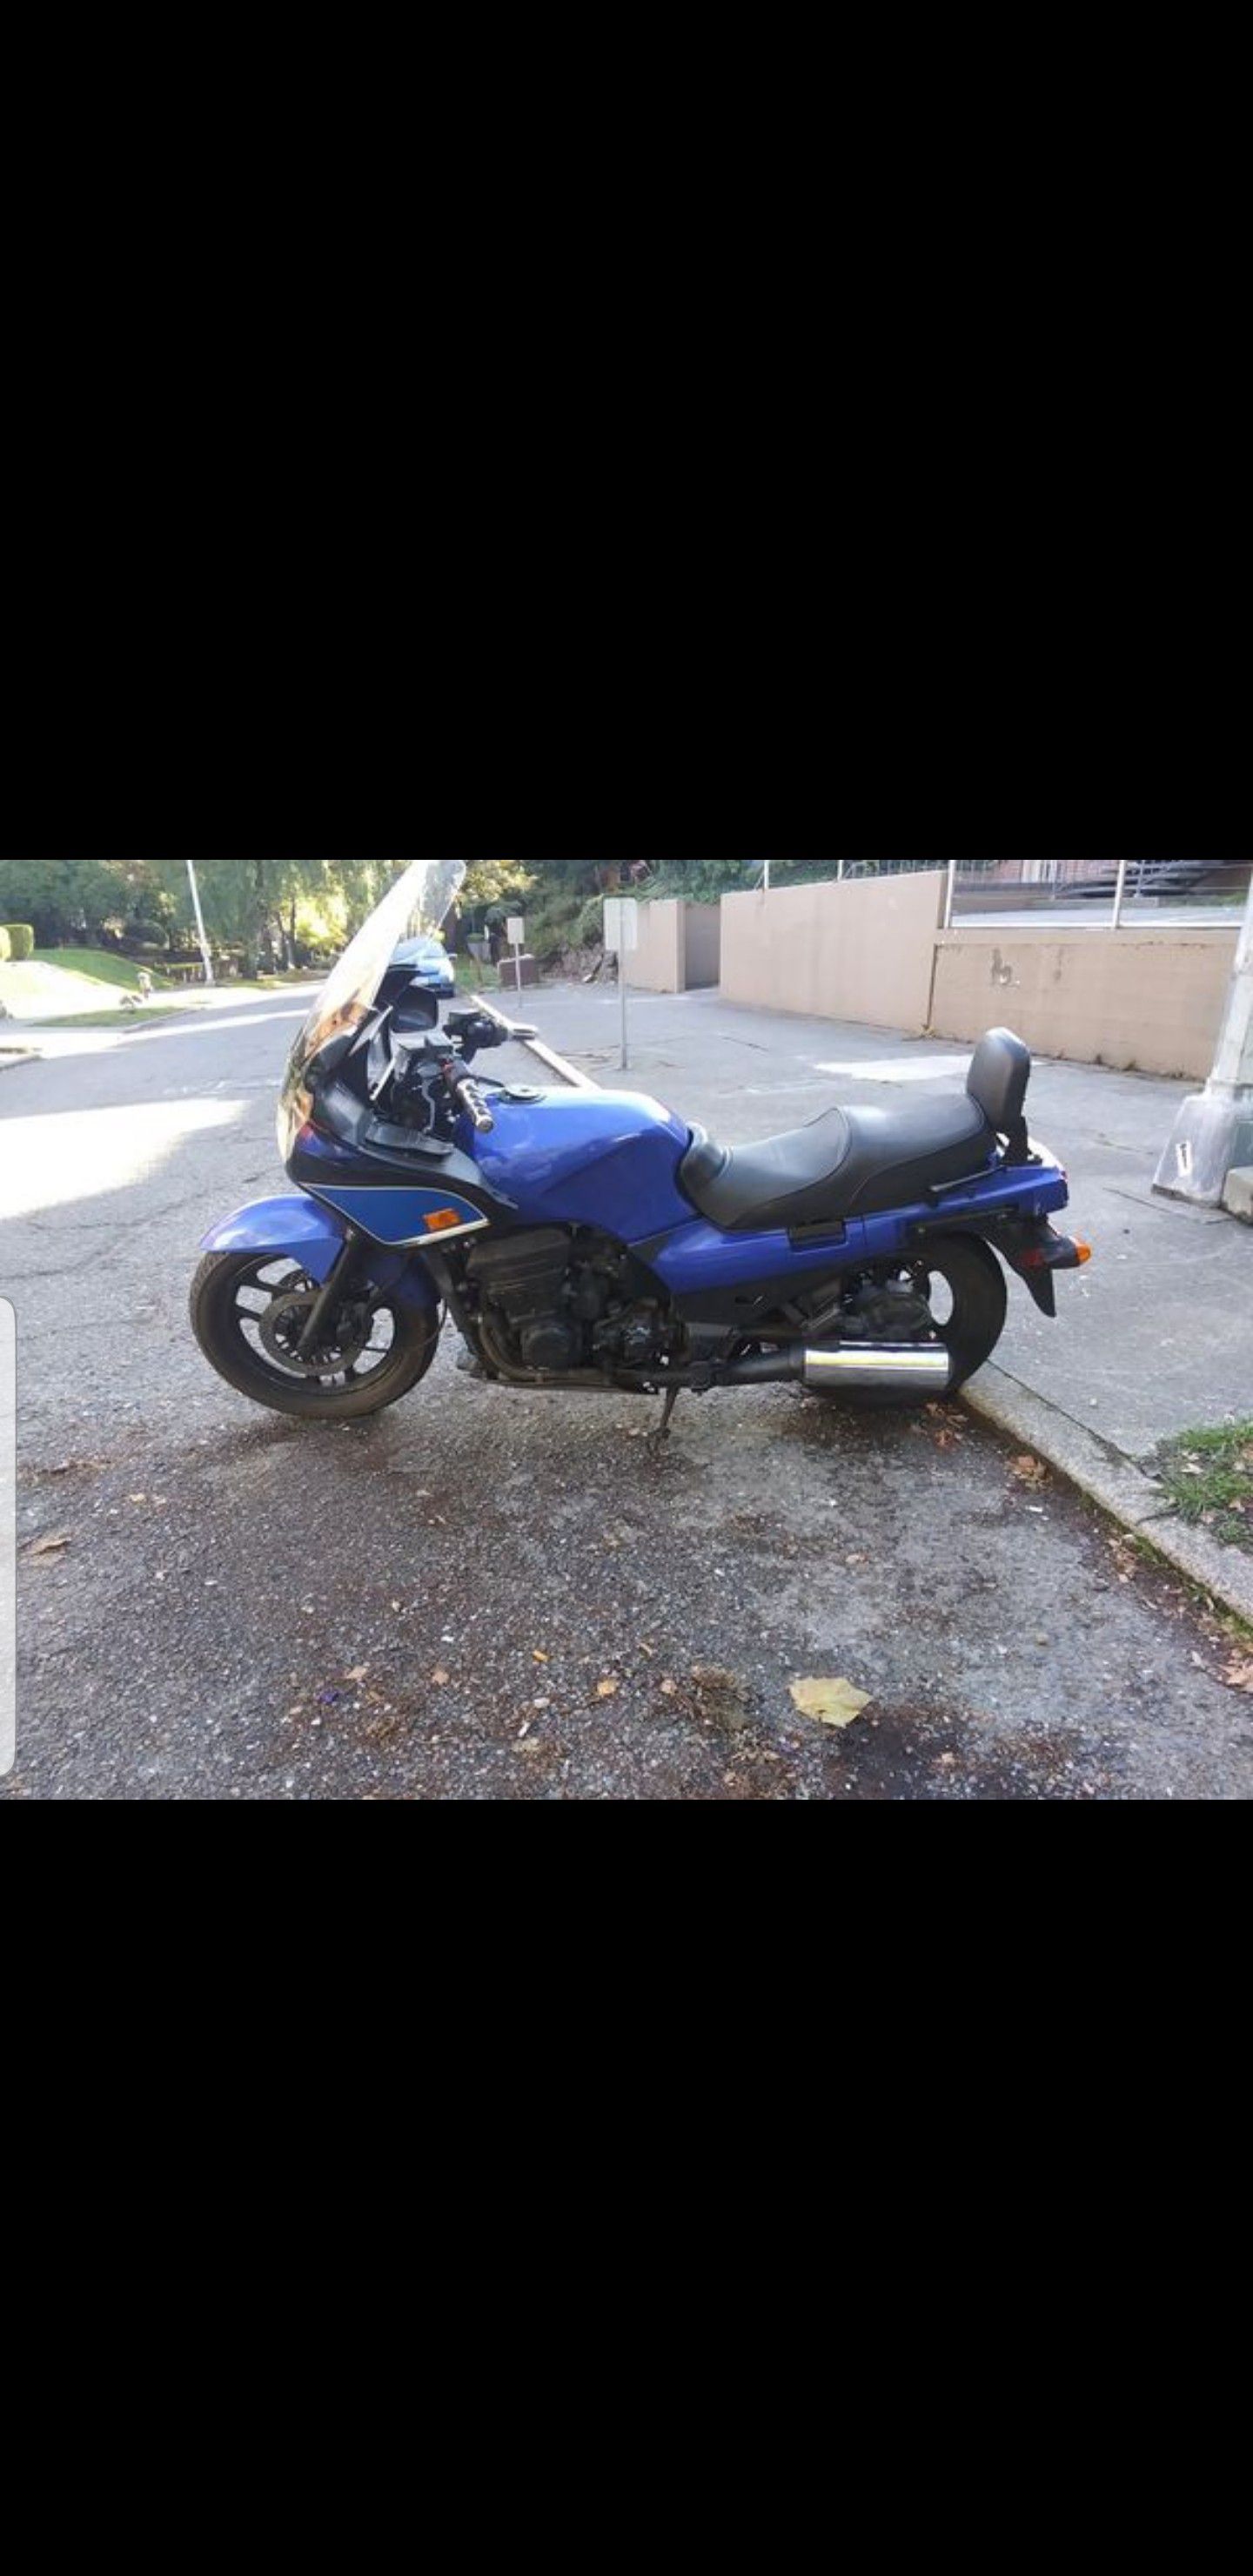 1988 zg1000 for trade (needs work)